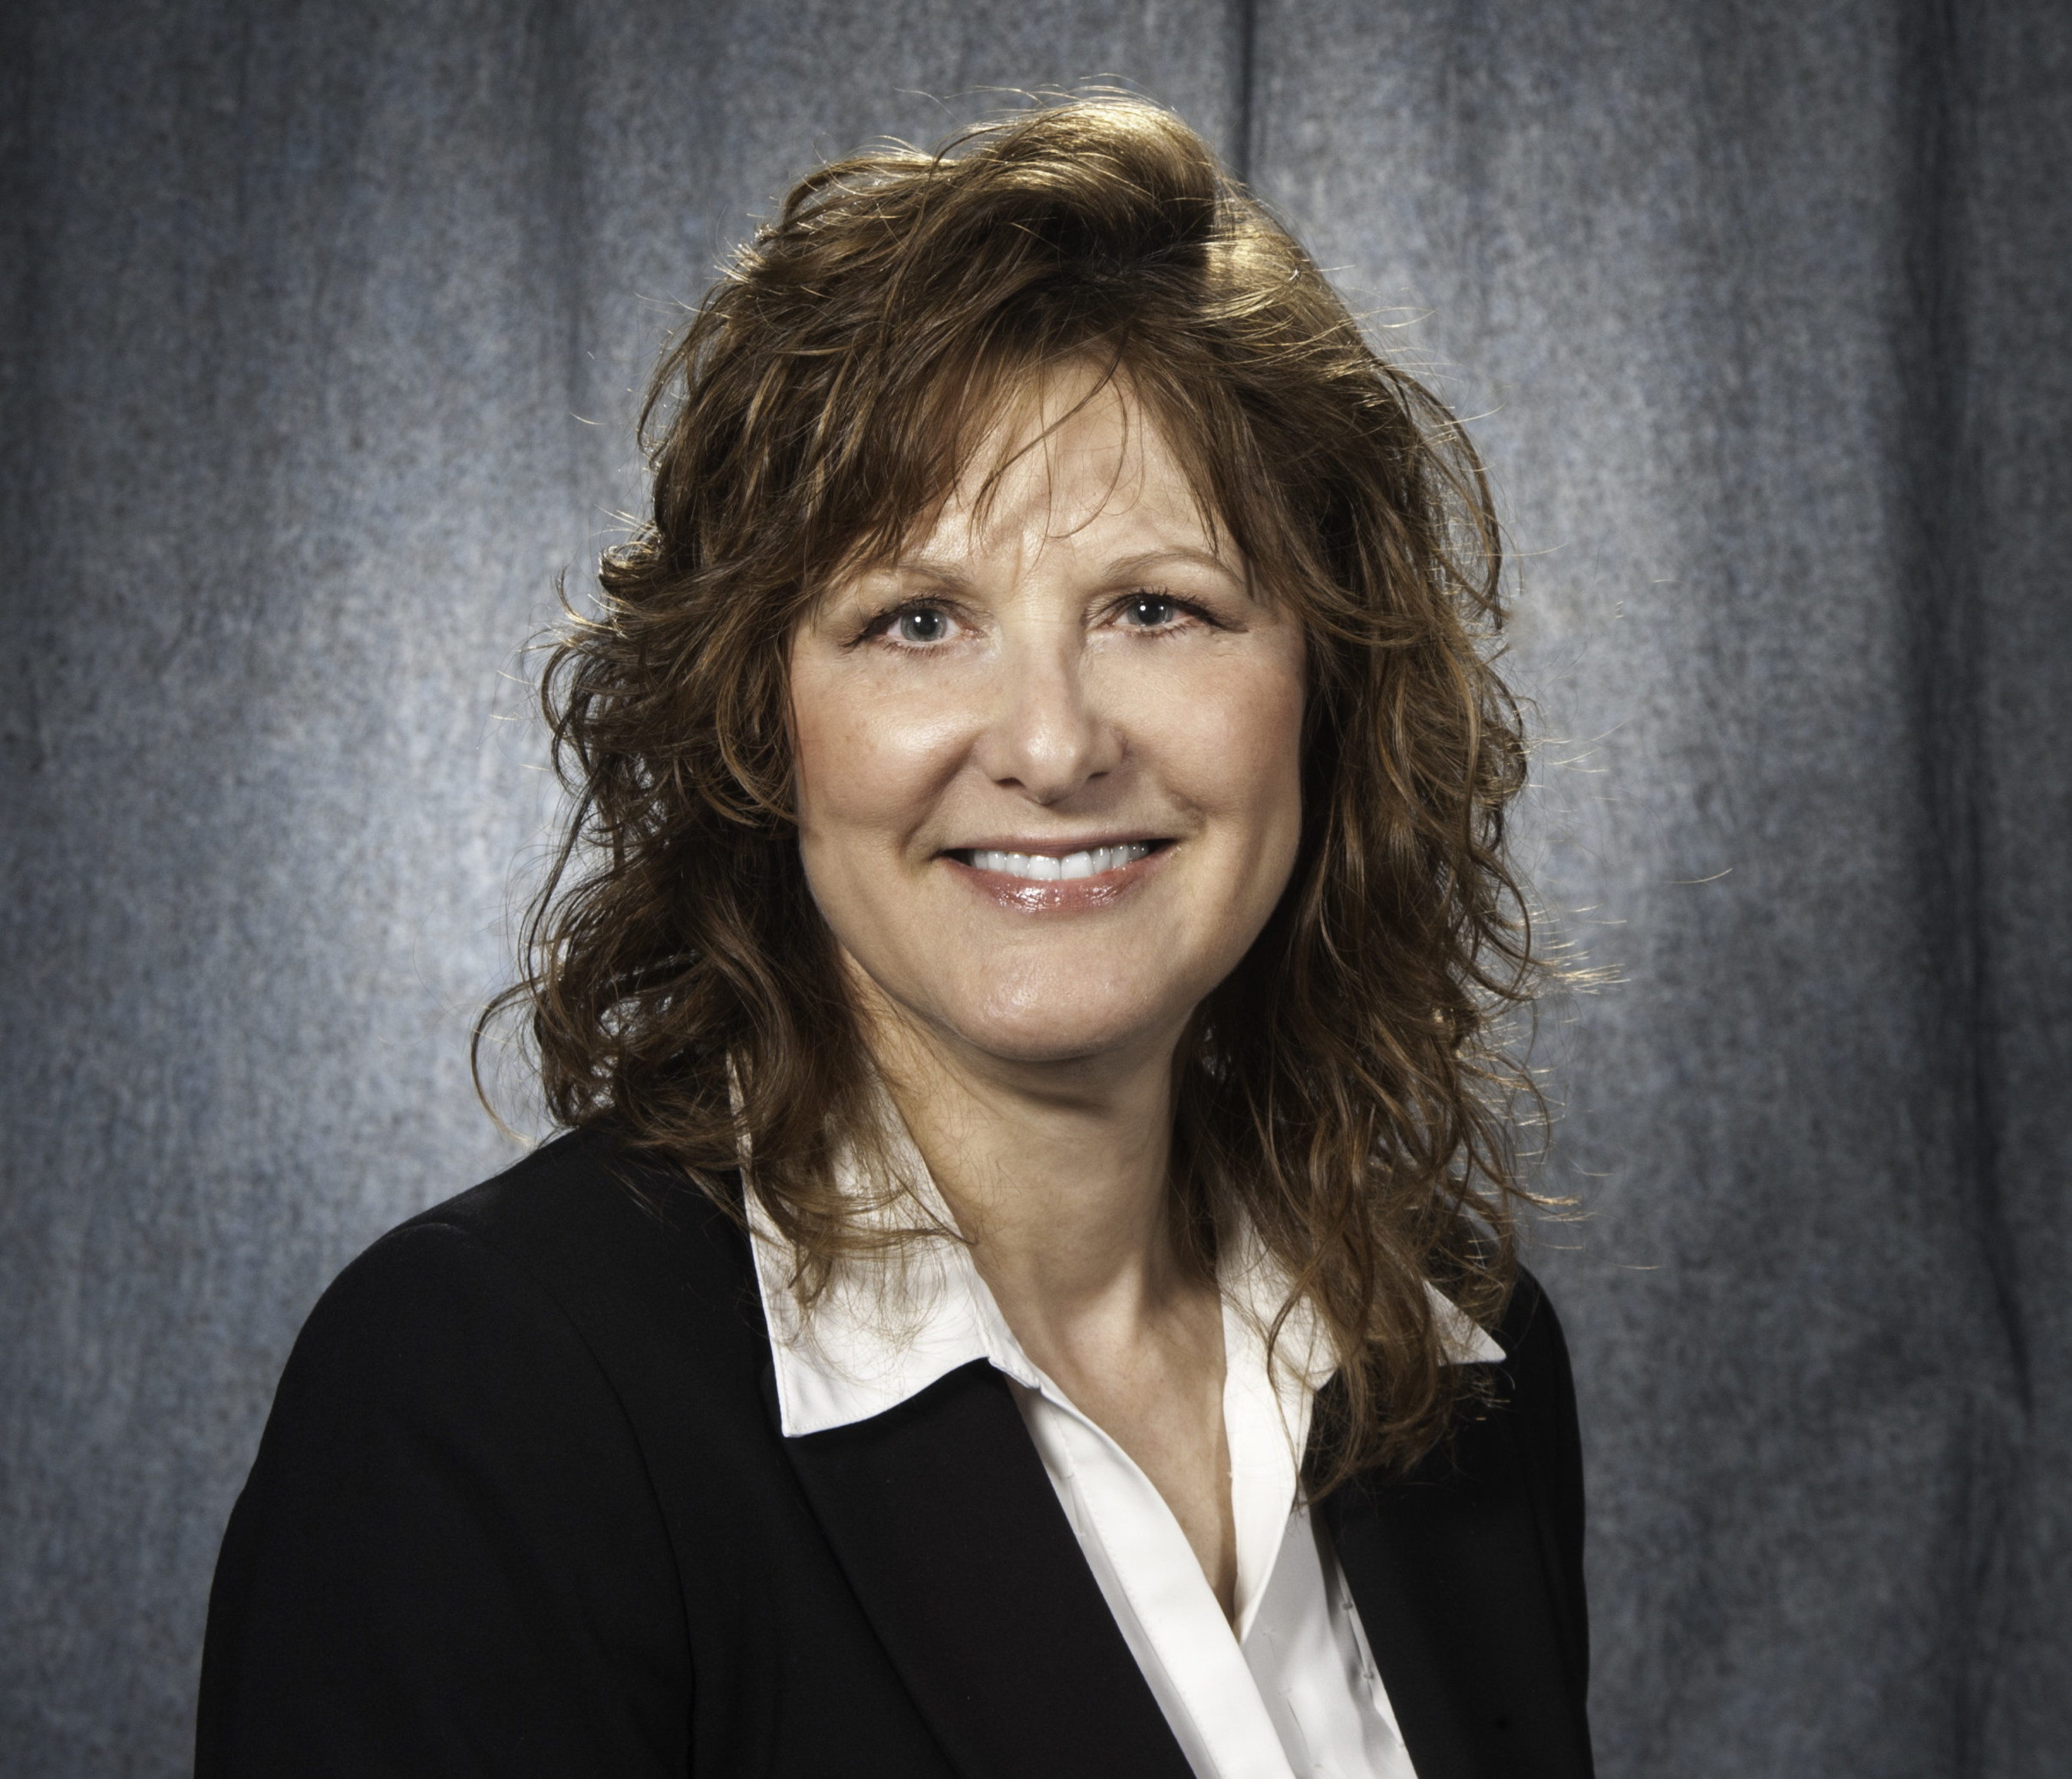 Gwenne Henricks, vice president with responsibility for the Product Development & Global Technology Division, is retiring from Caterpillar Inc.